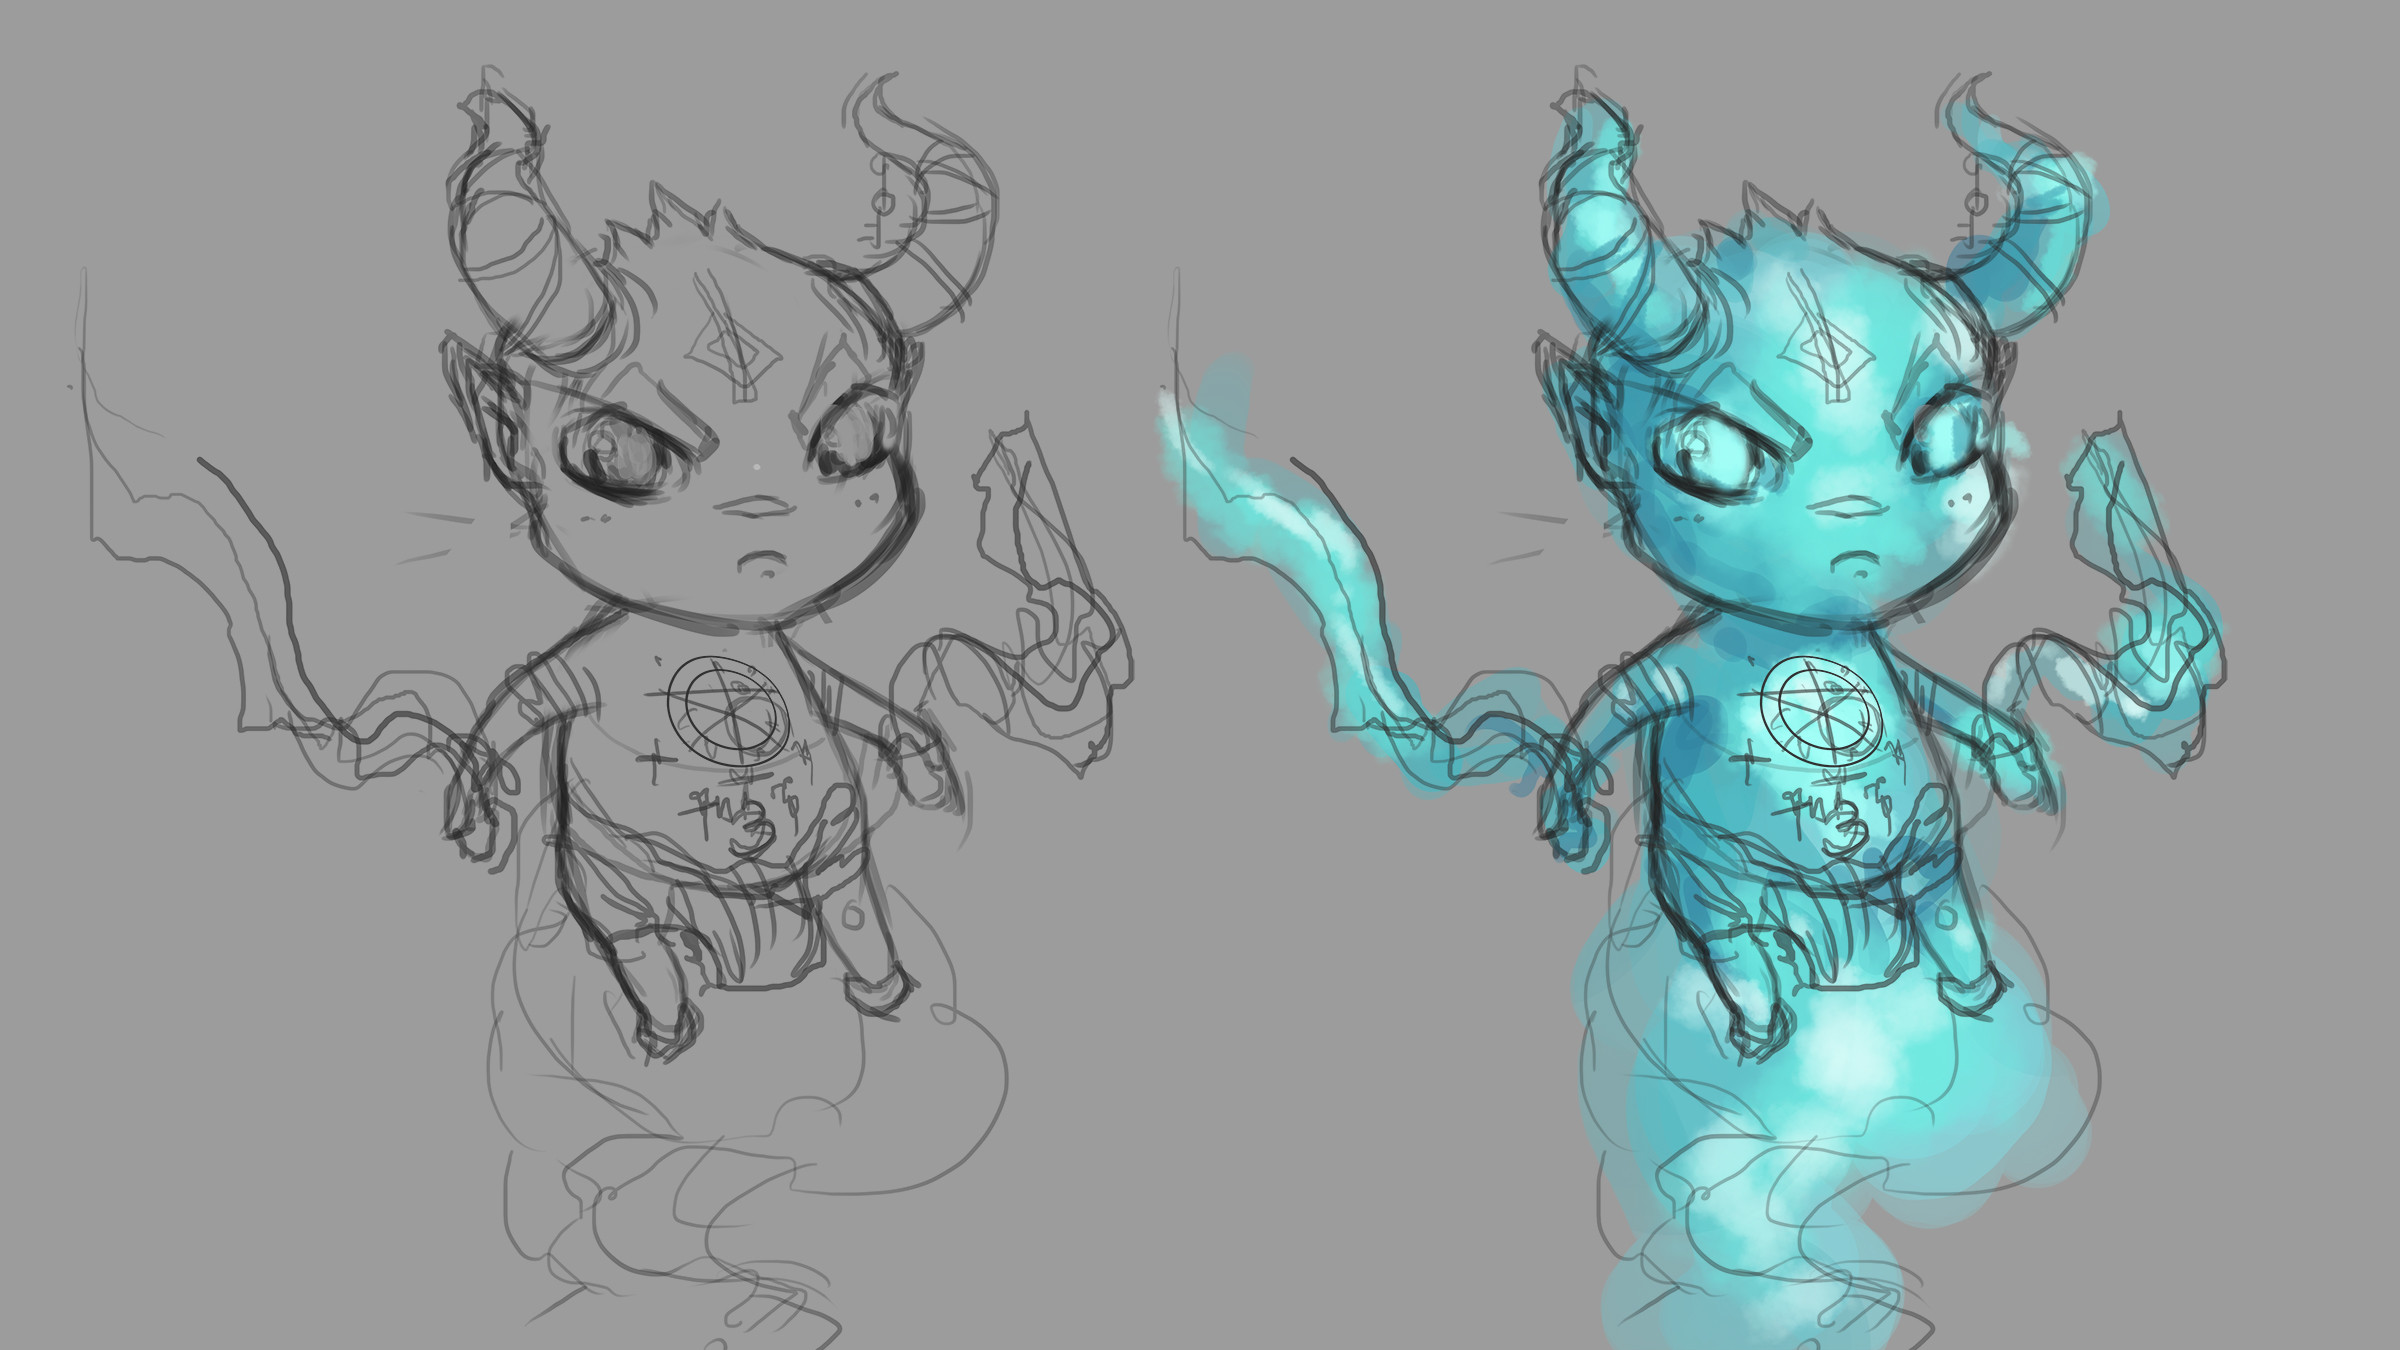 Early Wisp sketches